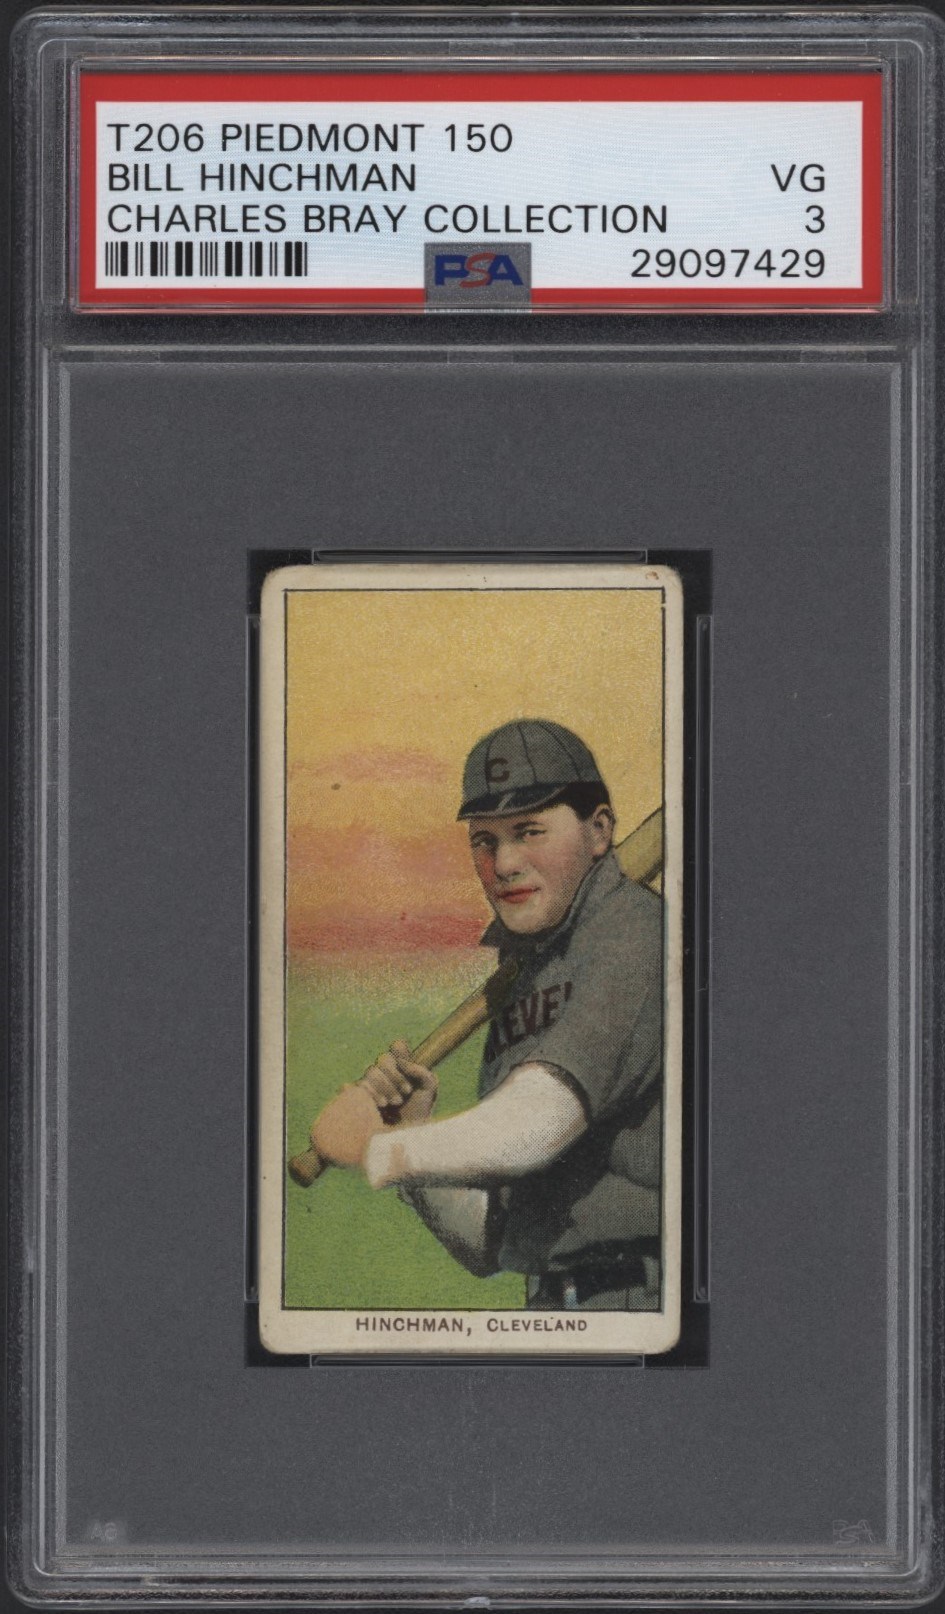 - T206 Piedmont 150 Bill Hinchman PSA 3 From the Charles Bray Collection